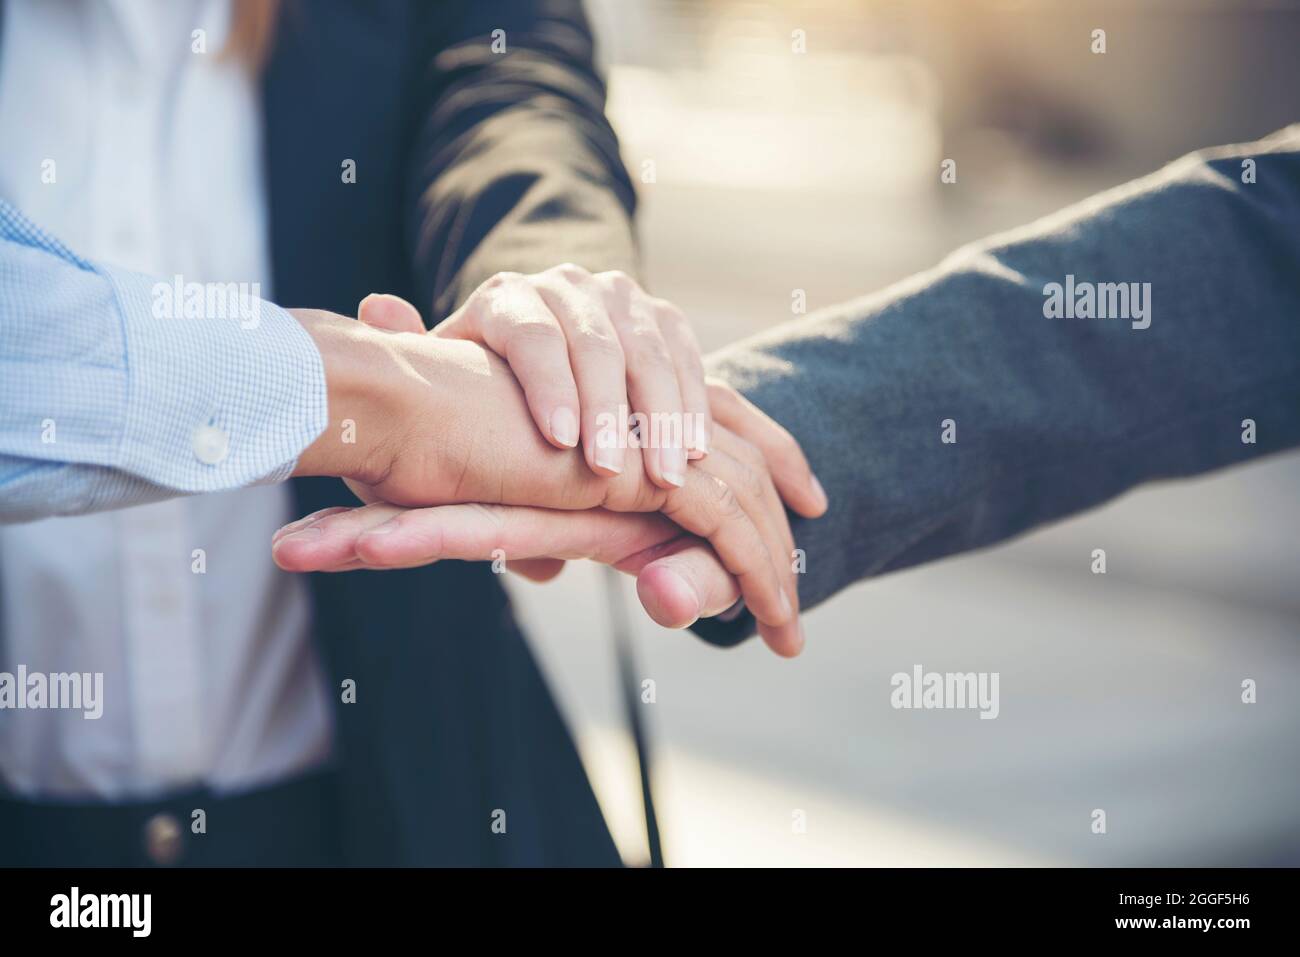 Group of diversity people with success partnership fist bump of hands together to show power and unified teams in office. Business teamwork trust in p Stock Photo